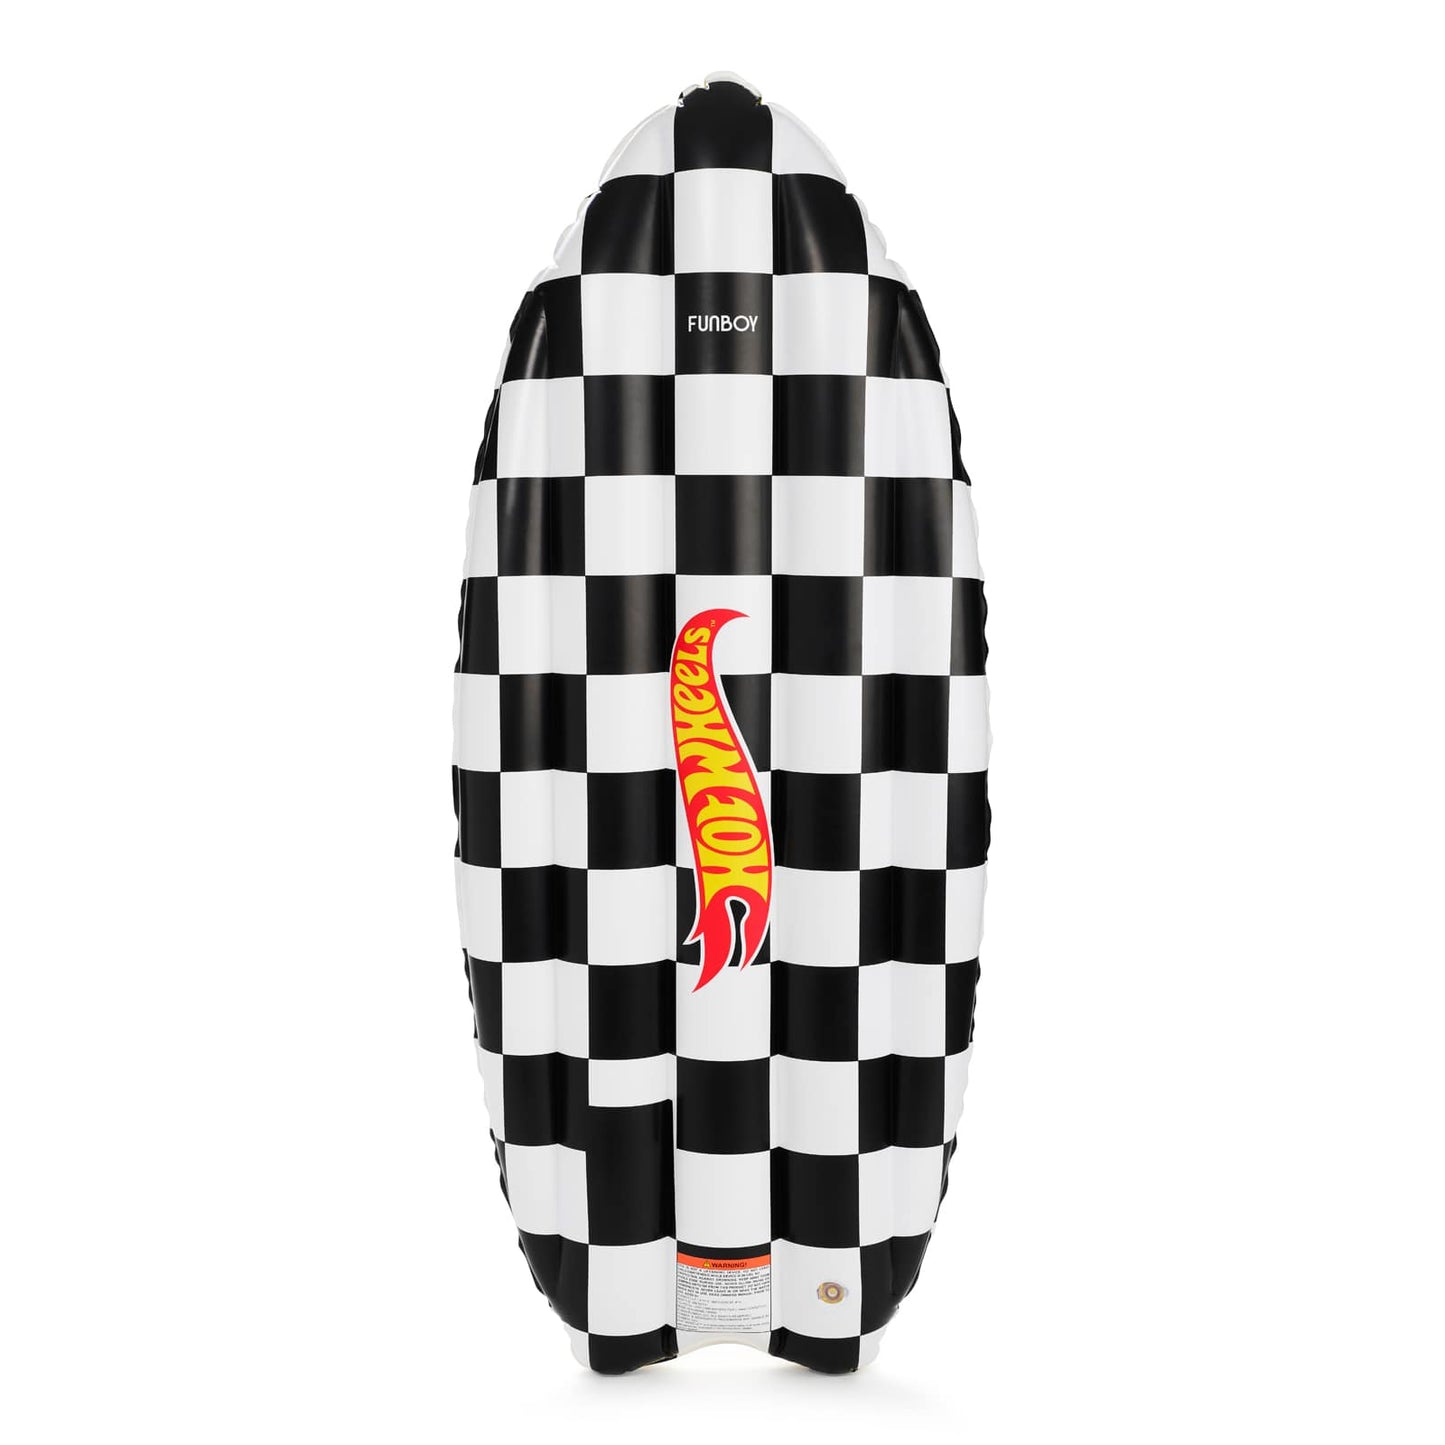 FUNBOY x Hot Wheels Checkered Flame Surfboard (Reversible) Float